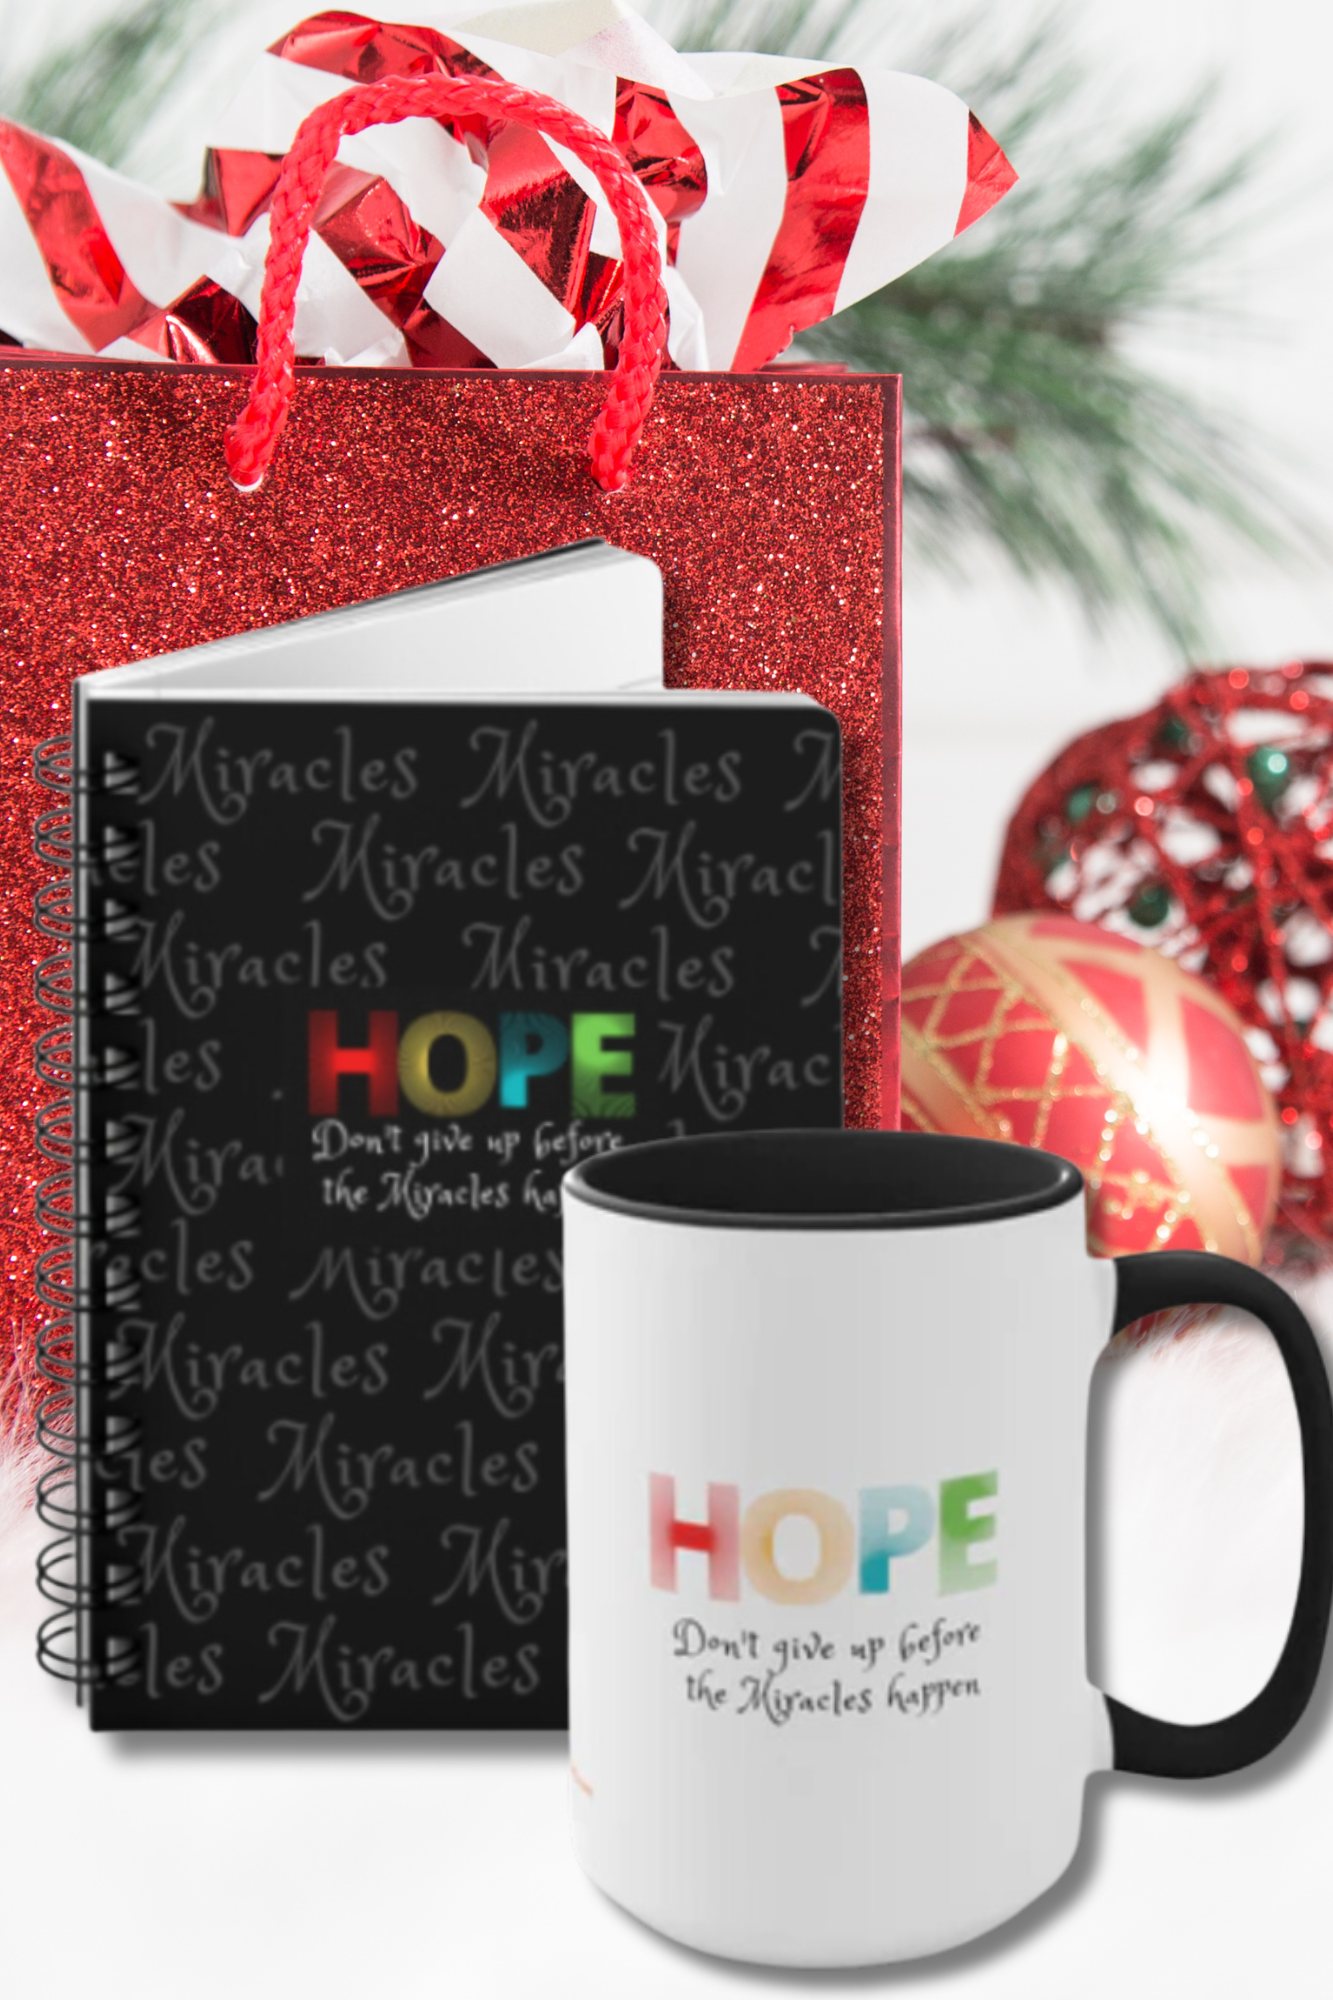 RECOVERY TOOLKIT-  "HOPE Don't Give Up Before the Miracles Happen" - 15 oz. mug and 5"x7" Recovery Journal (2 gifts in 1)